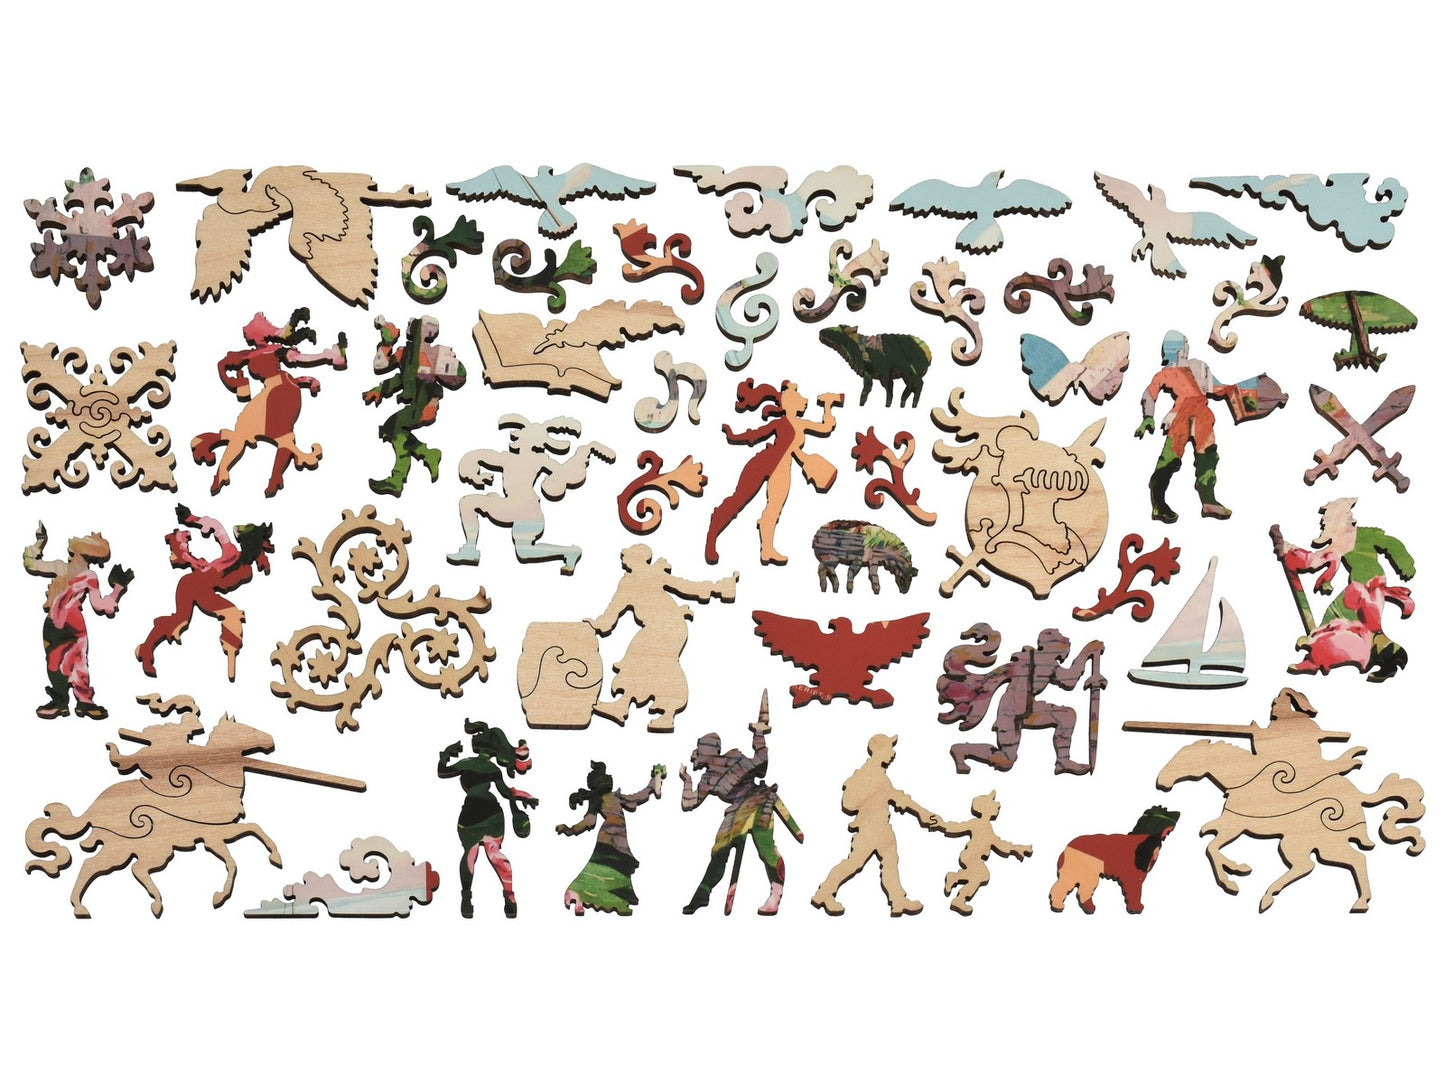 The whimsy pieces from the puzzle of Wisby Castle.